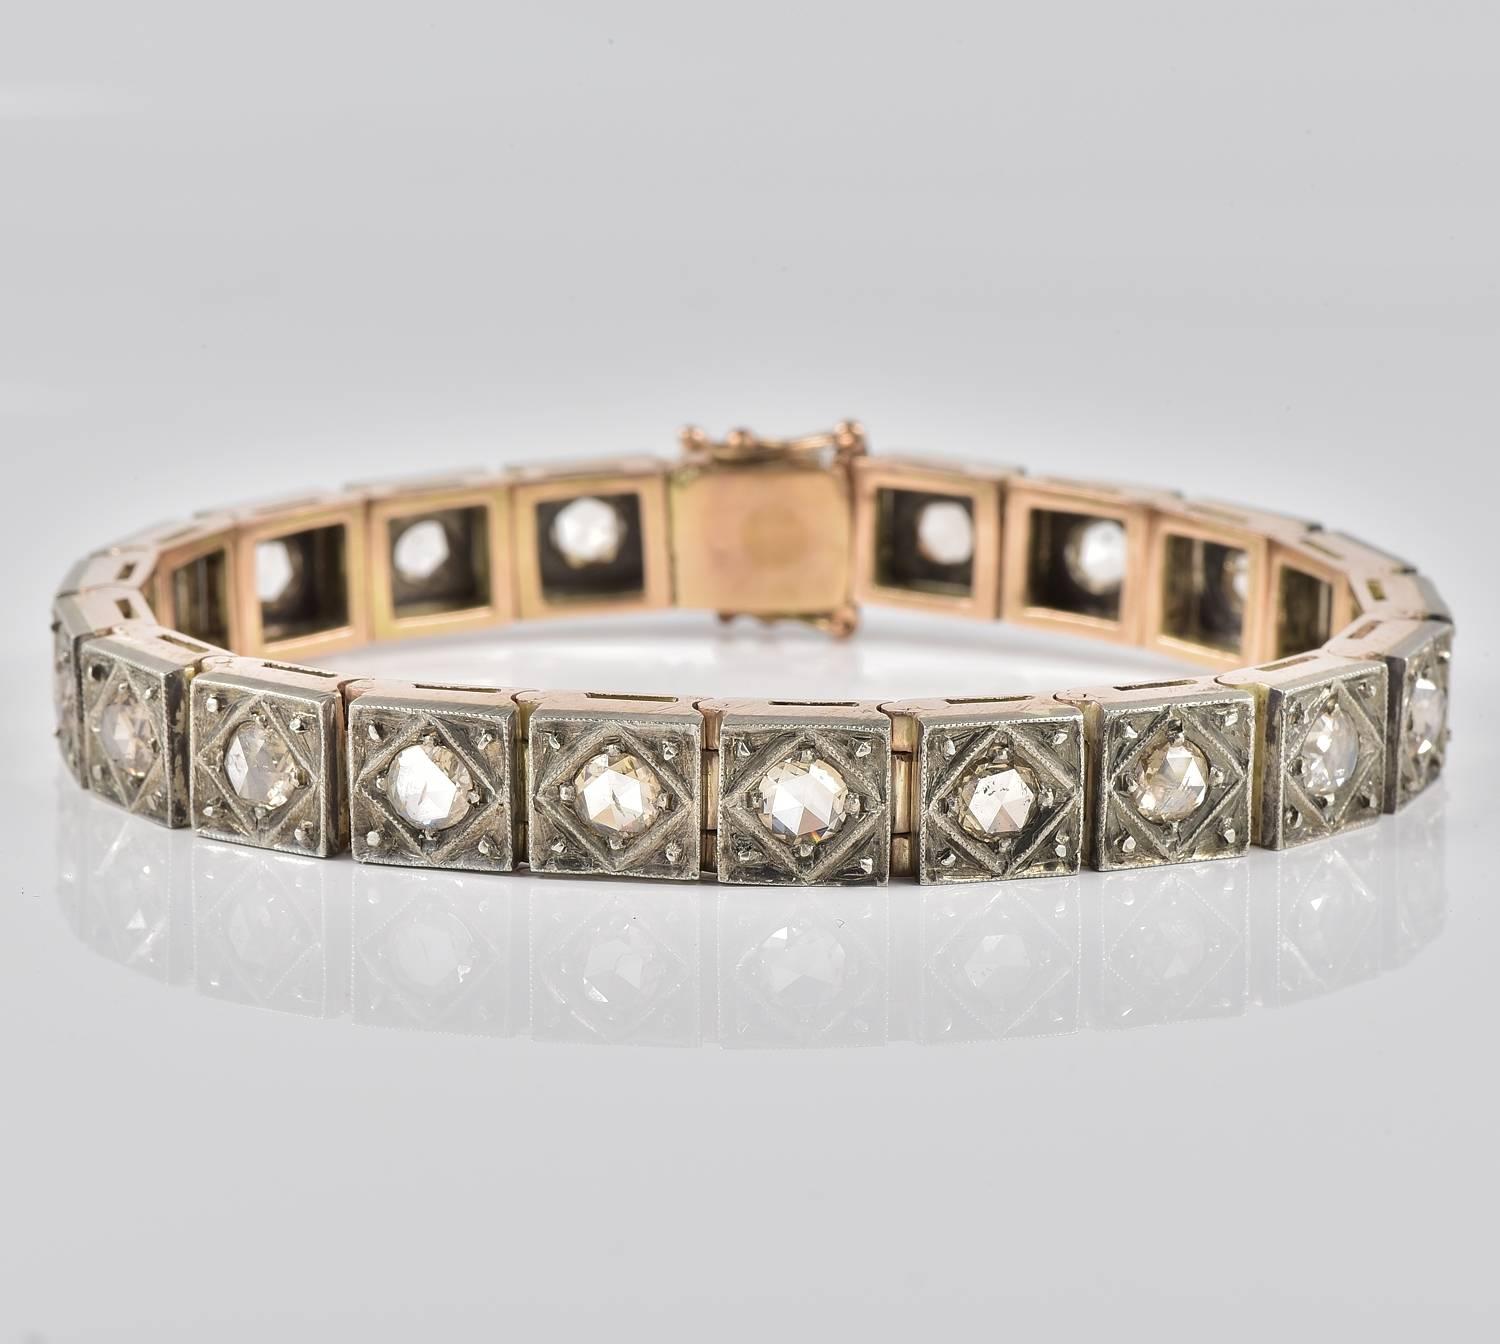 Rare and beautiful authentic Victorian Diamond riviere bracelet dating 1890 ca!
Substantially hand crafted of solid 14 KT gold topped by silver – marked but worn
A soft line wraps around the wrist with amazing Diamond Sparkle detailed only by the